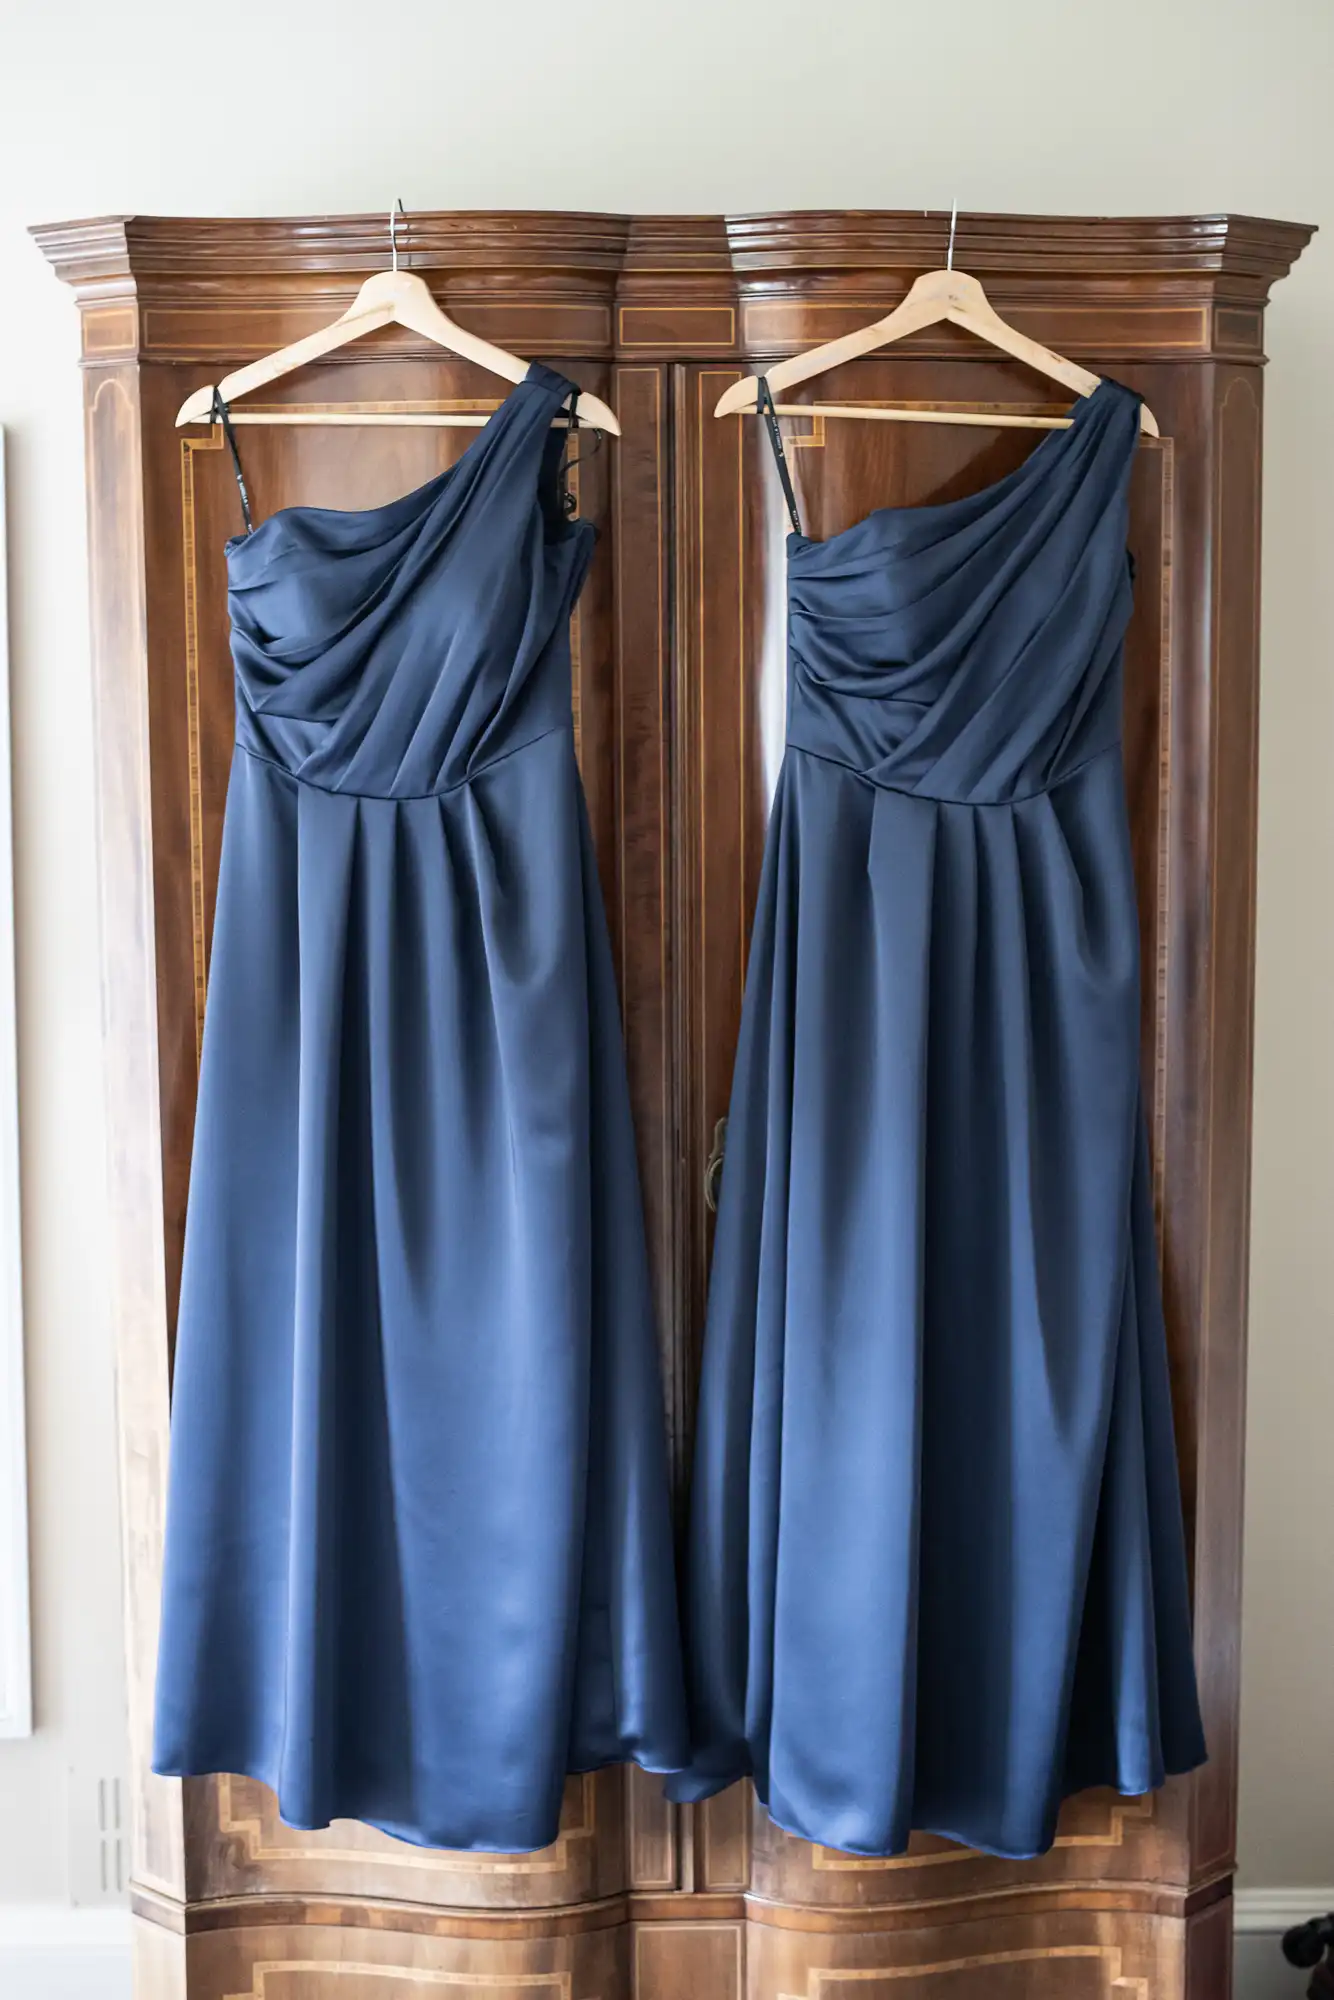 Two blue bridesmaid dresses hanging on wooden hangers against an antique wooden wardrobe.